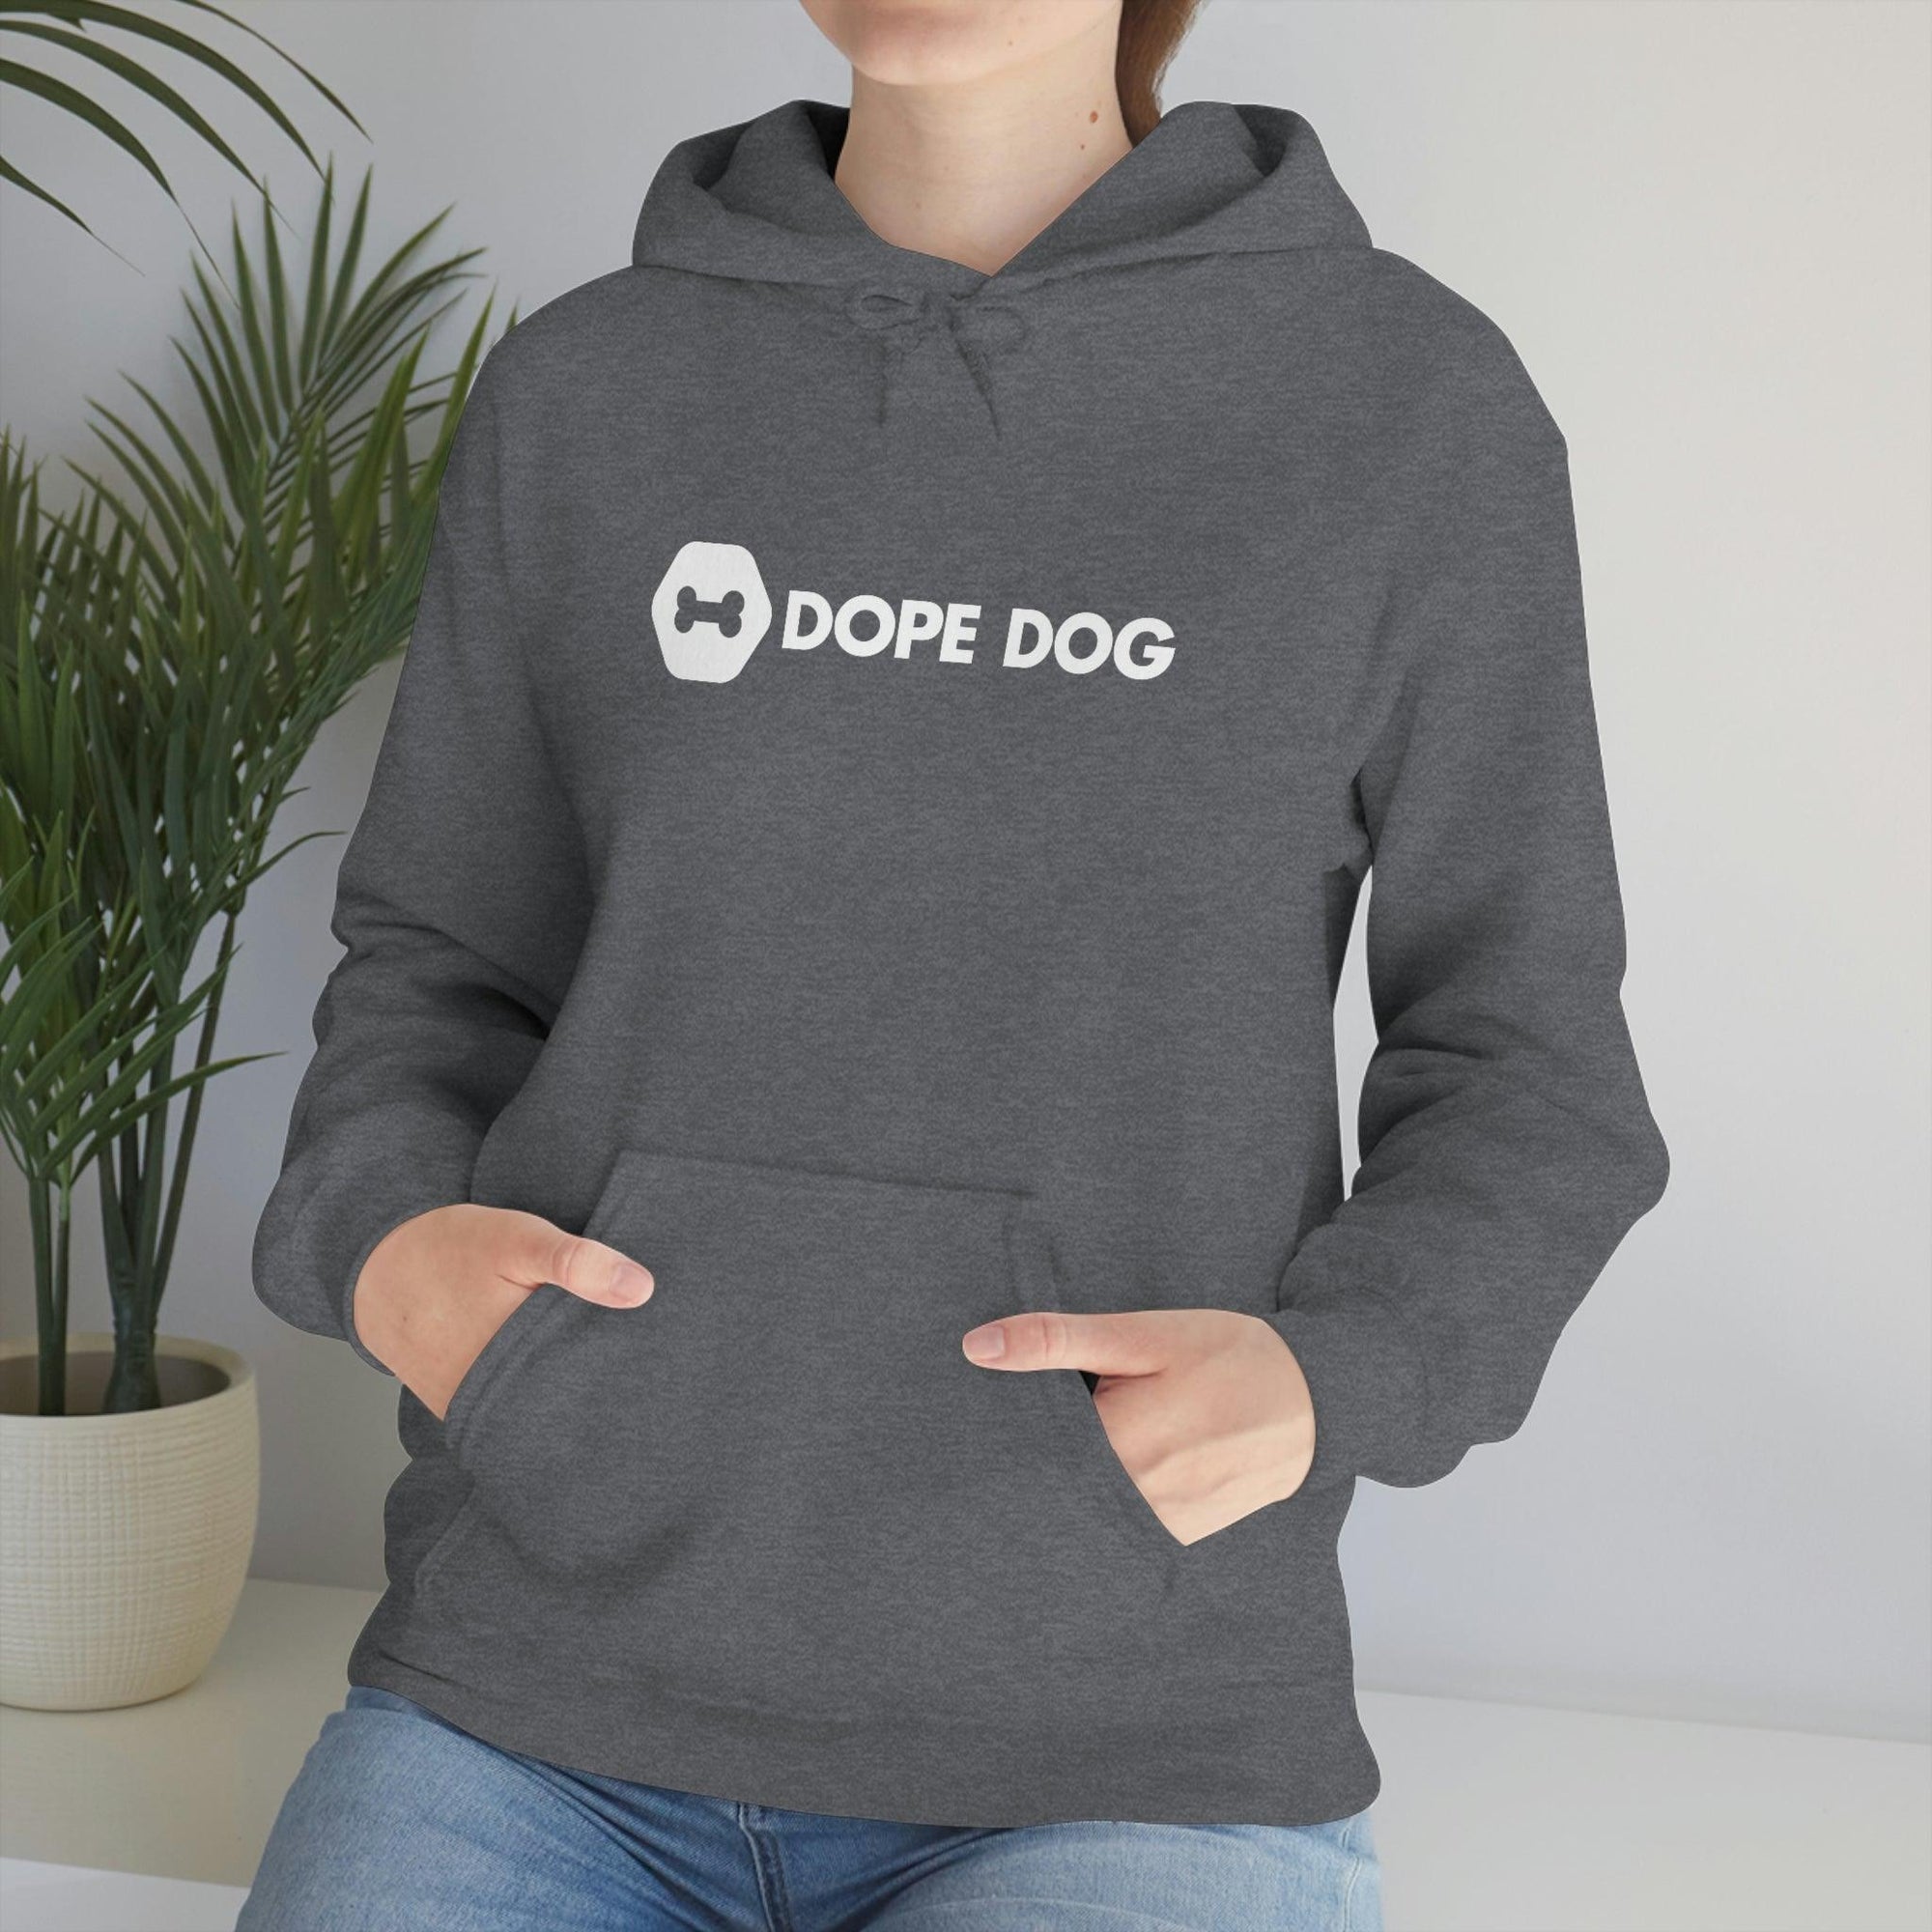 Dope Dog Official Pack Hoodie - Dope Dog 